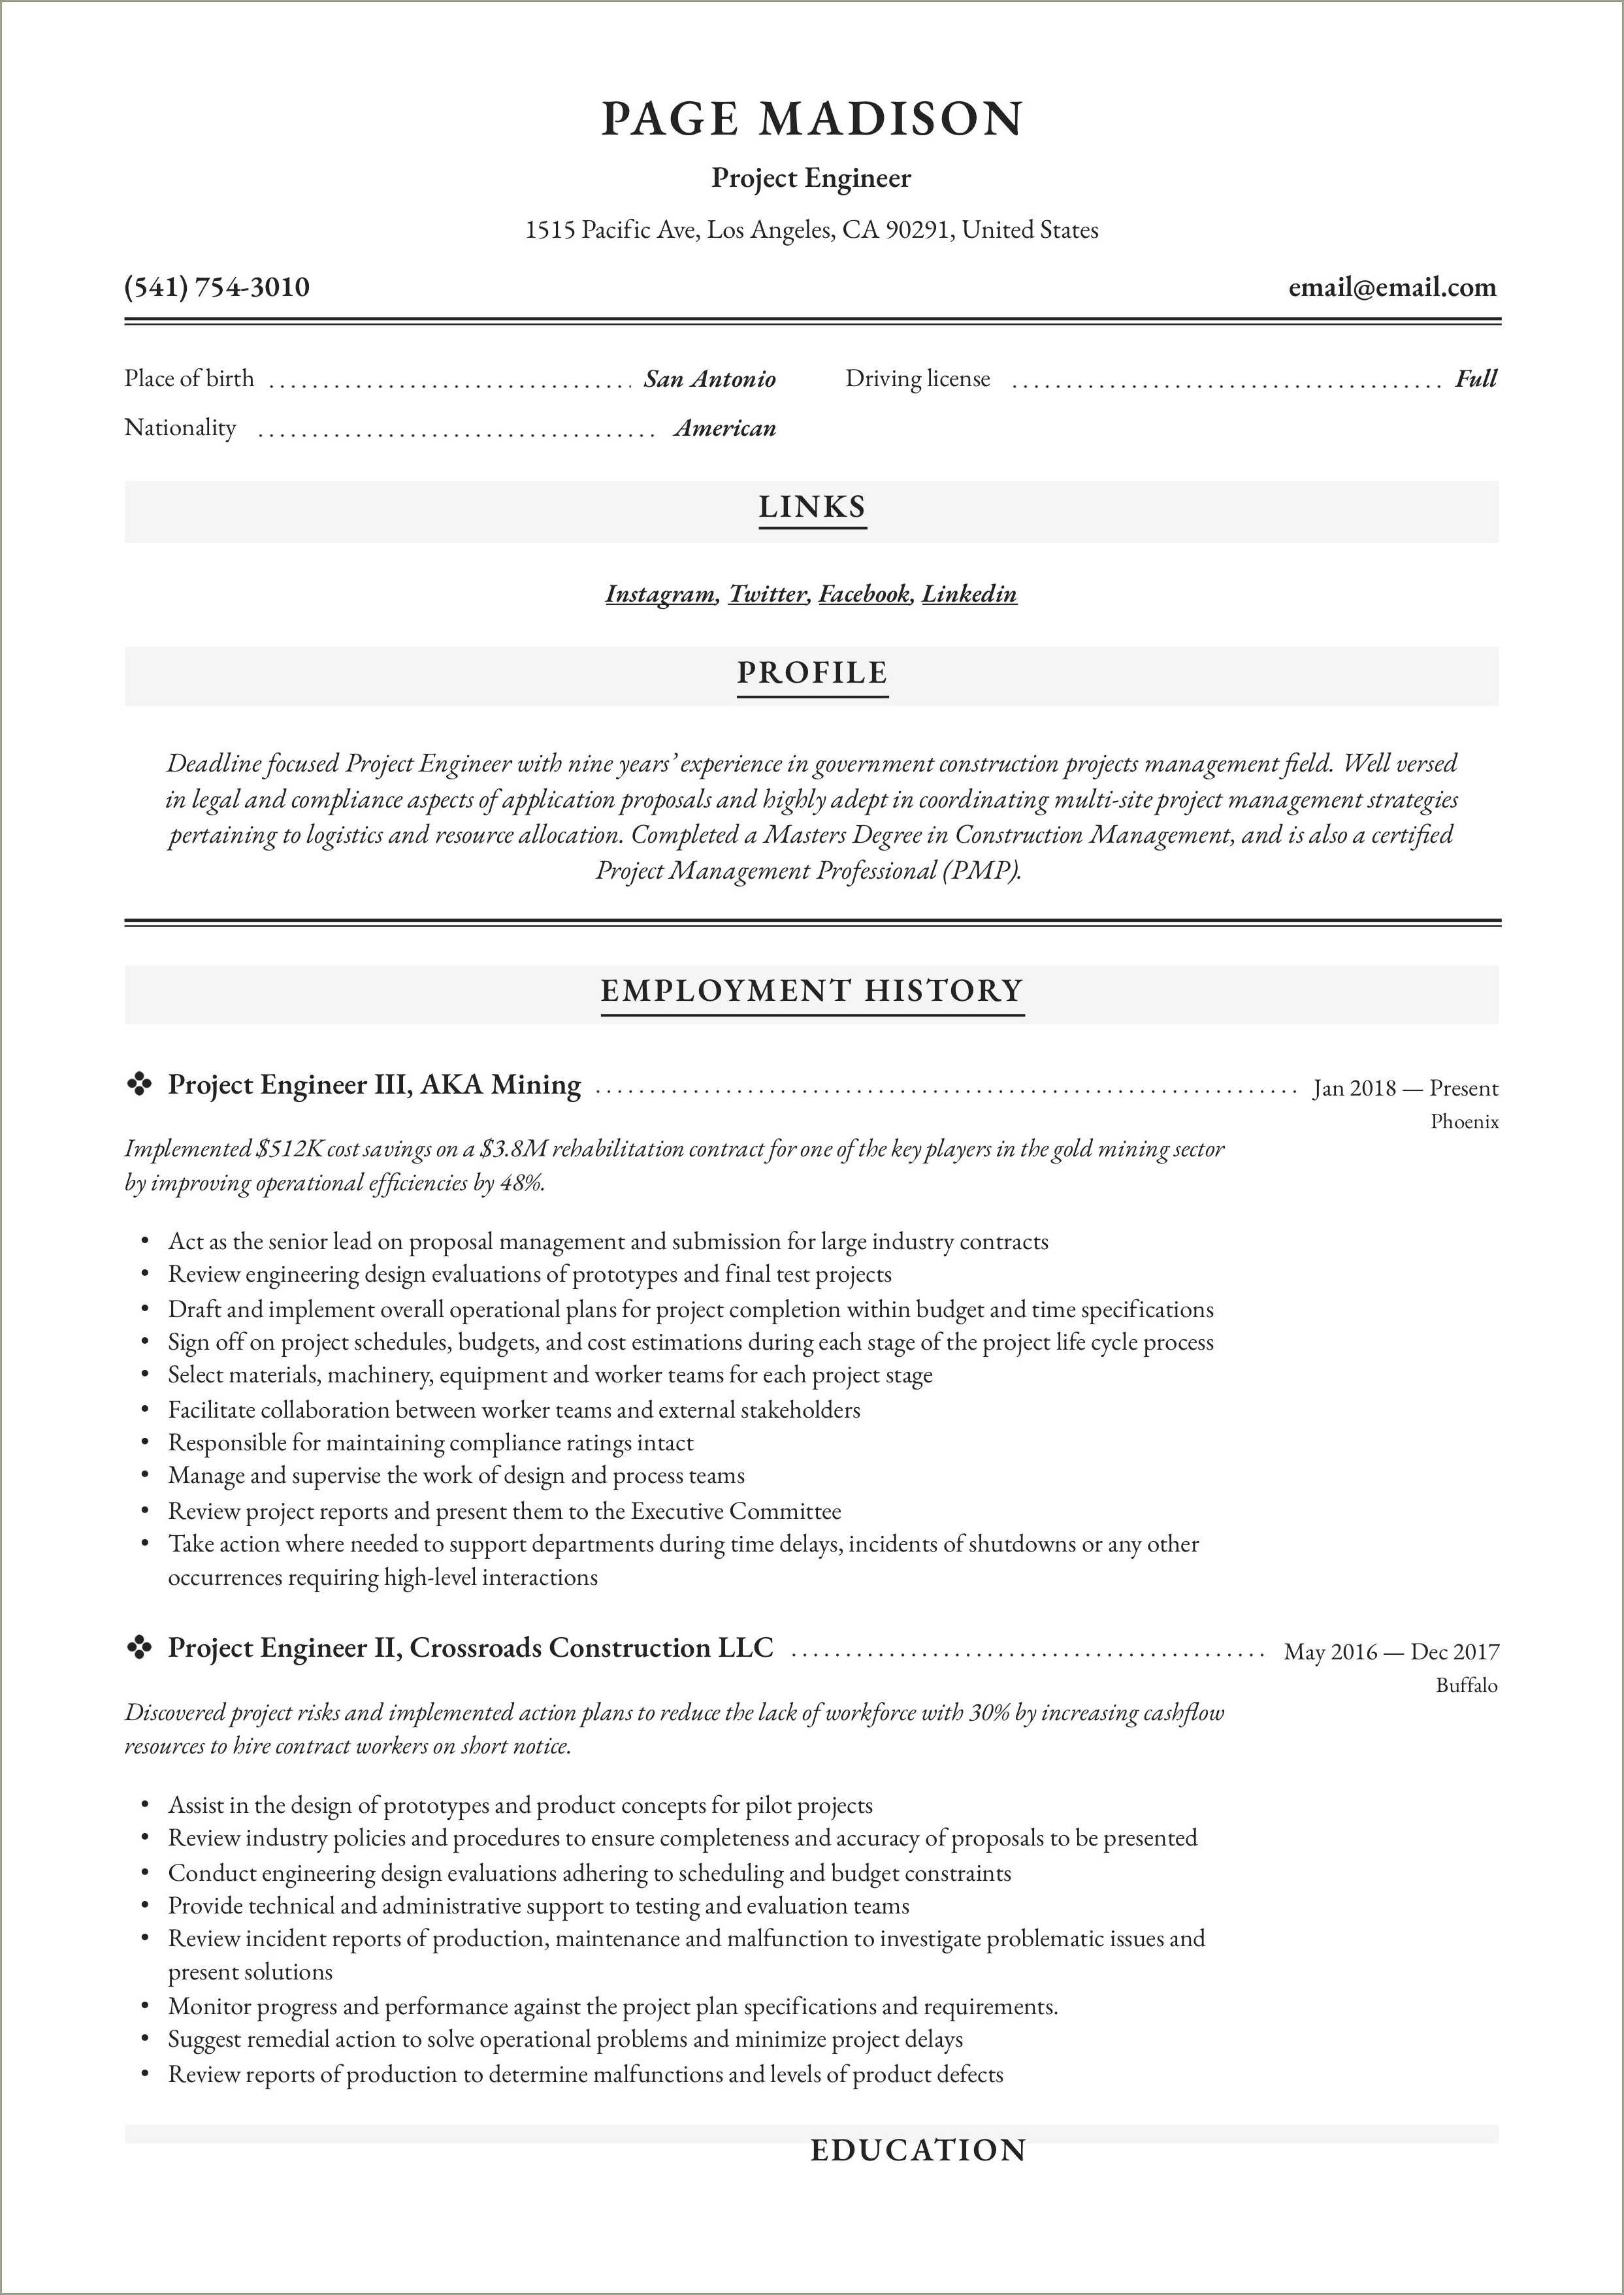 3 Years Experience Hvac Project Engineer Resume